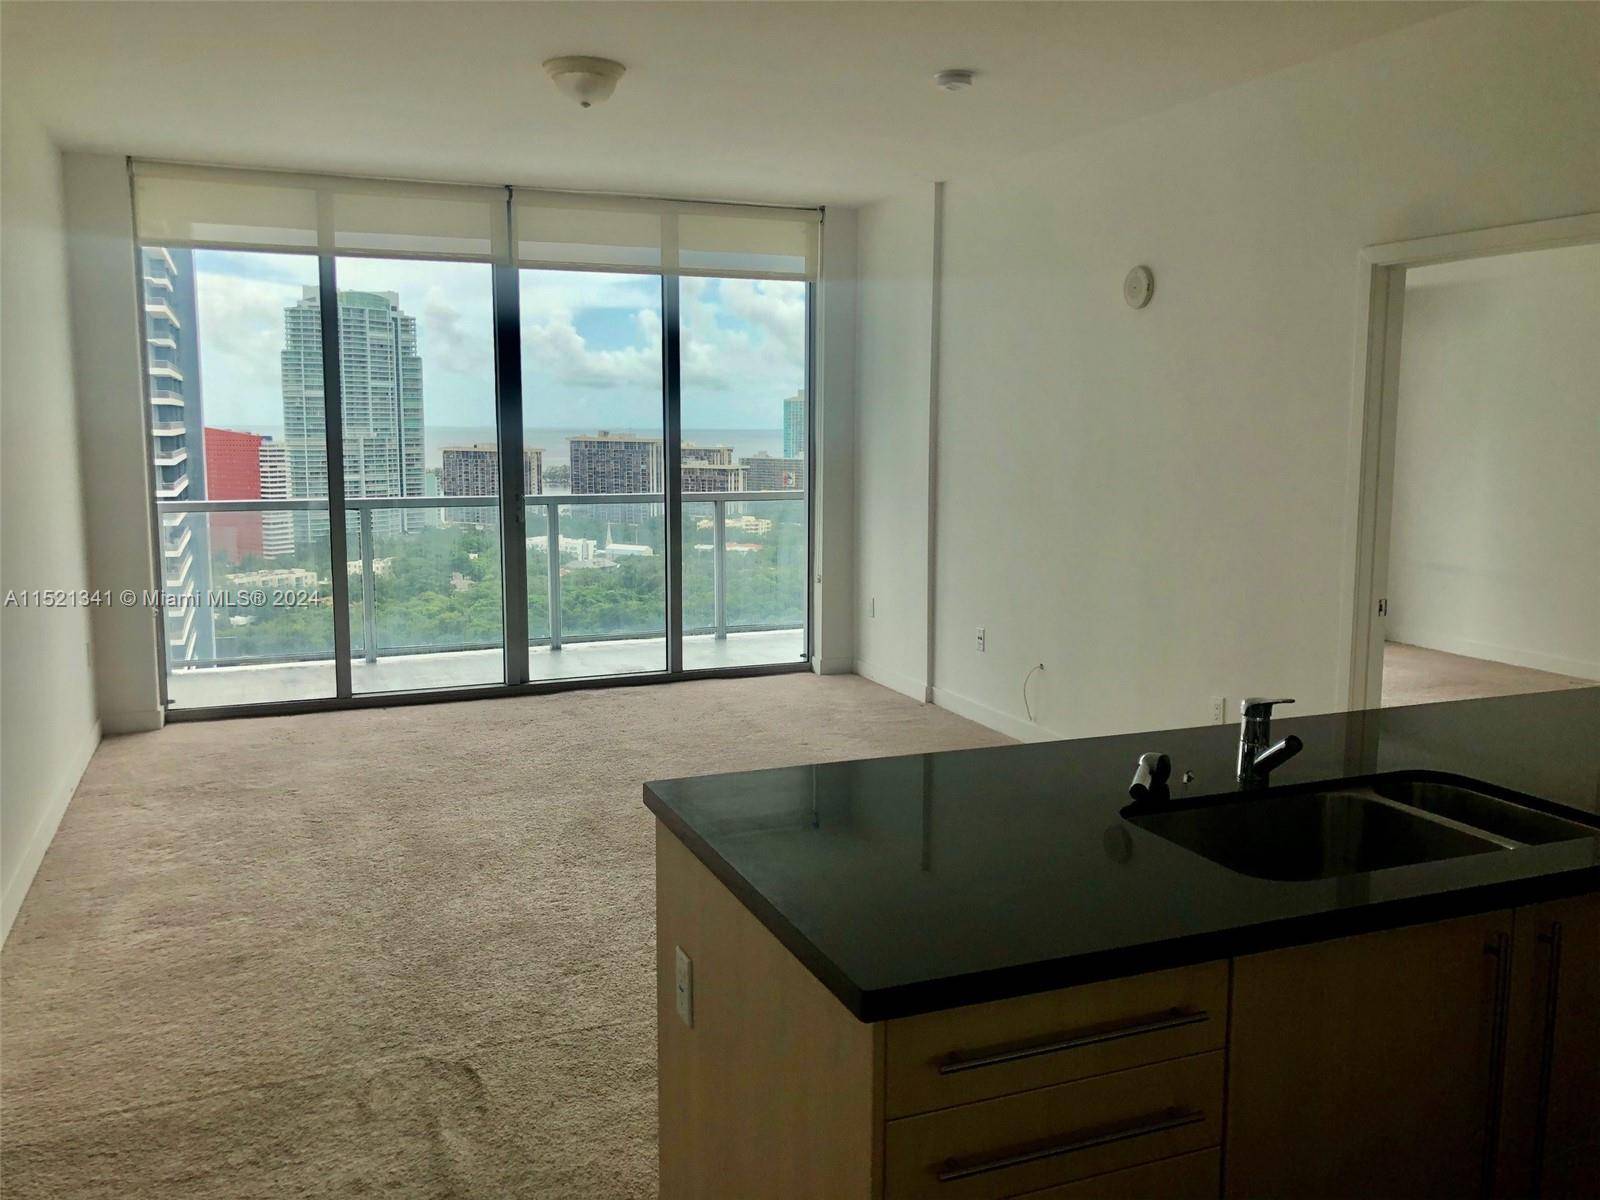 High floor 2 2 split plan with gorgeous south facing water views.